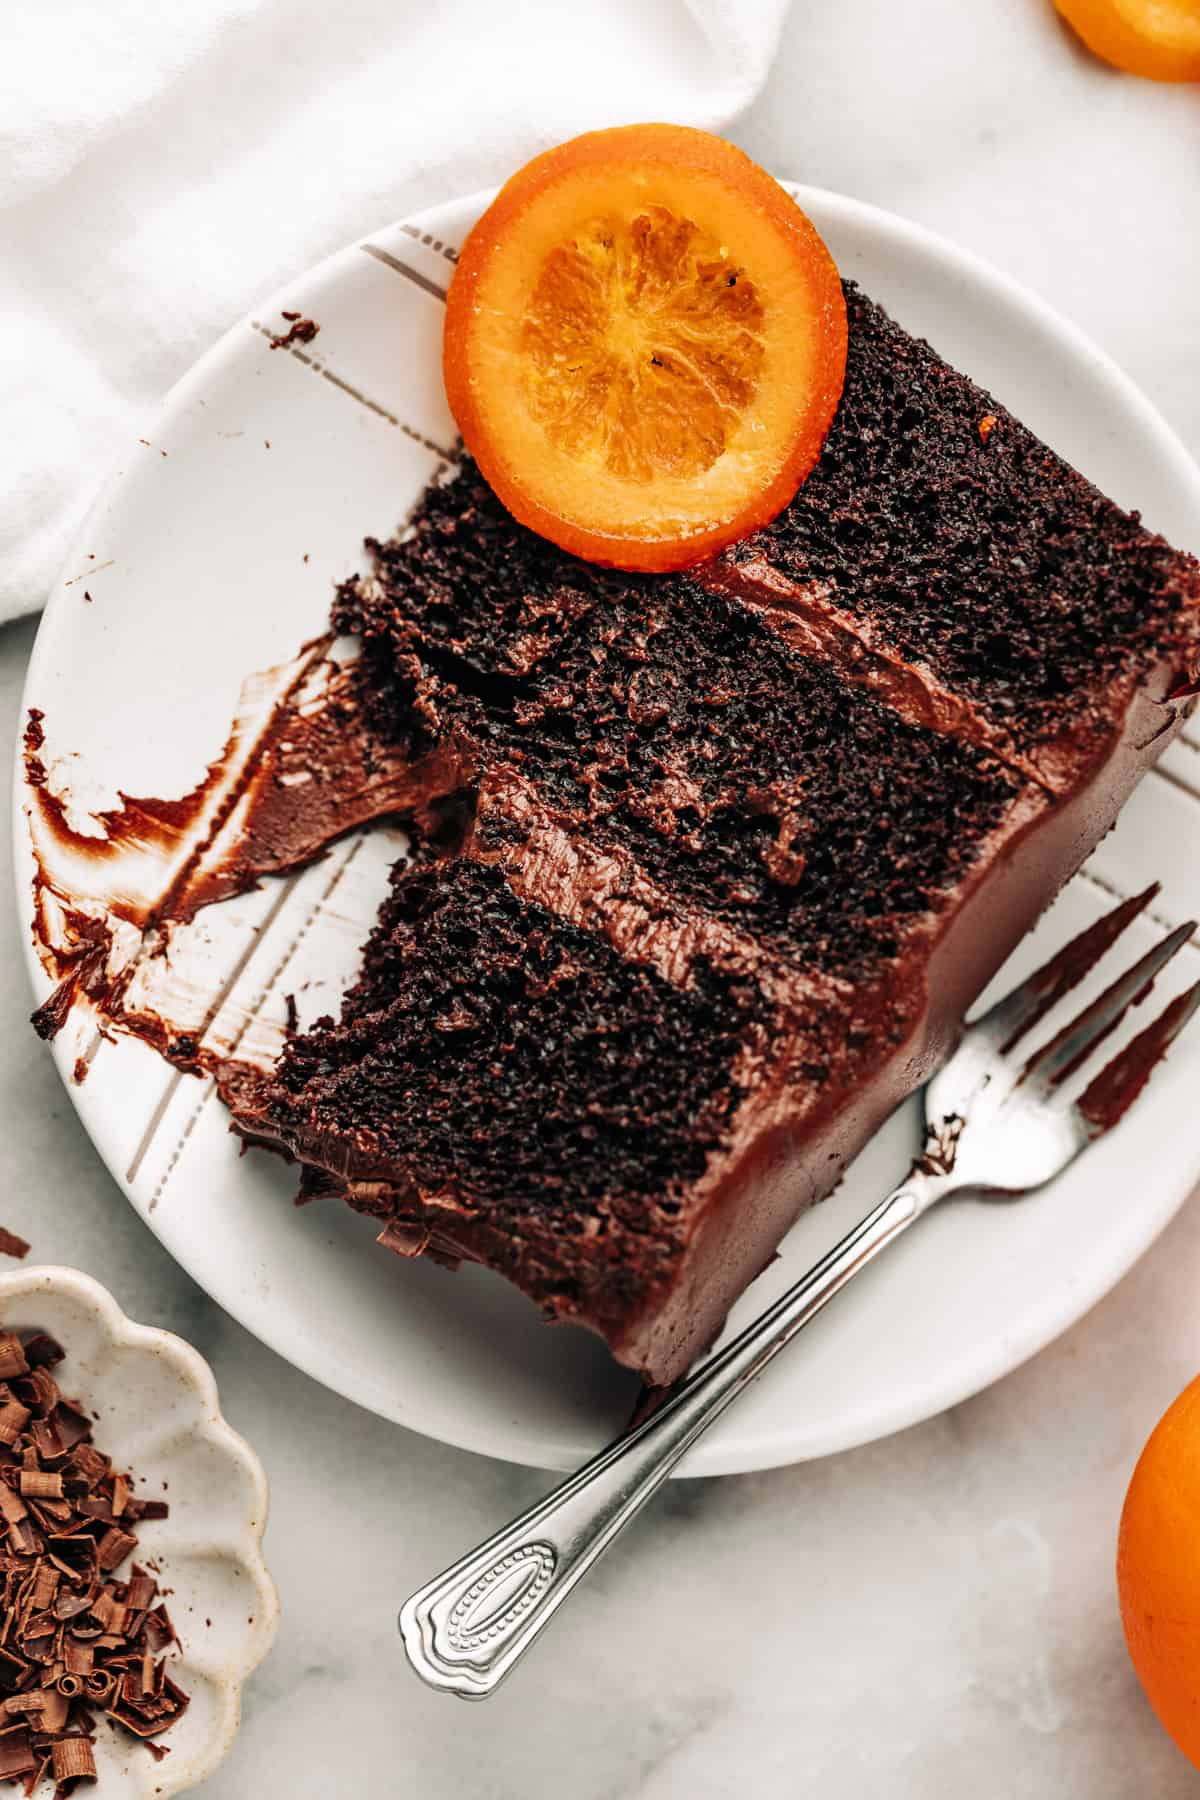 a slice of chocolate orange cake with fudge frosting on a plate.